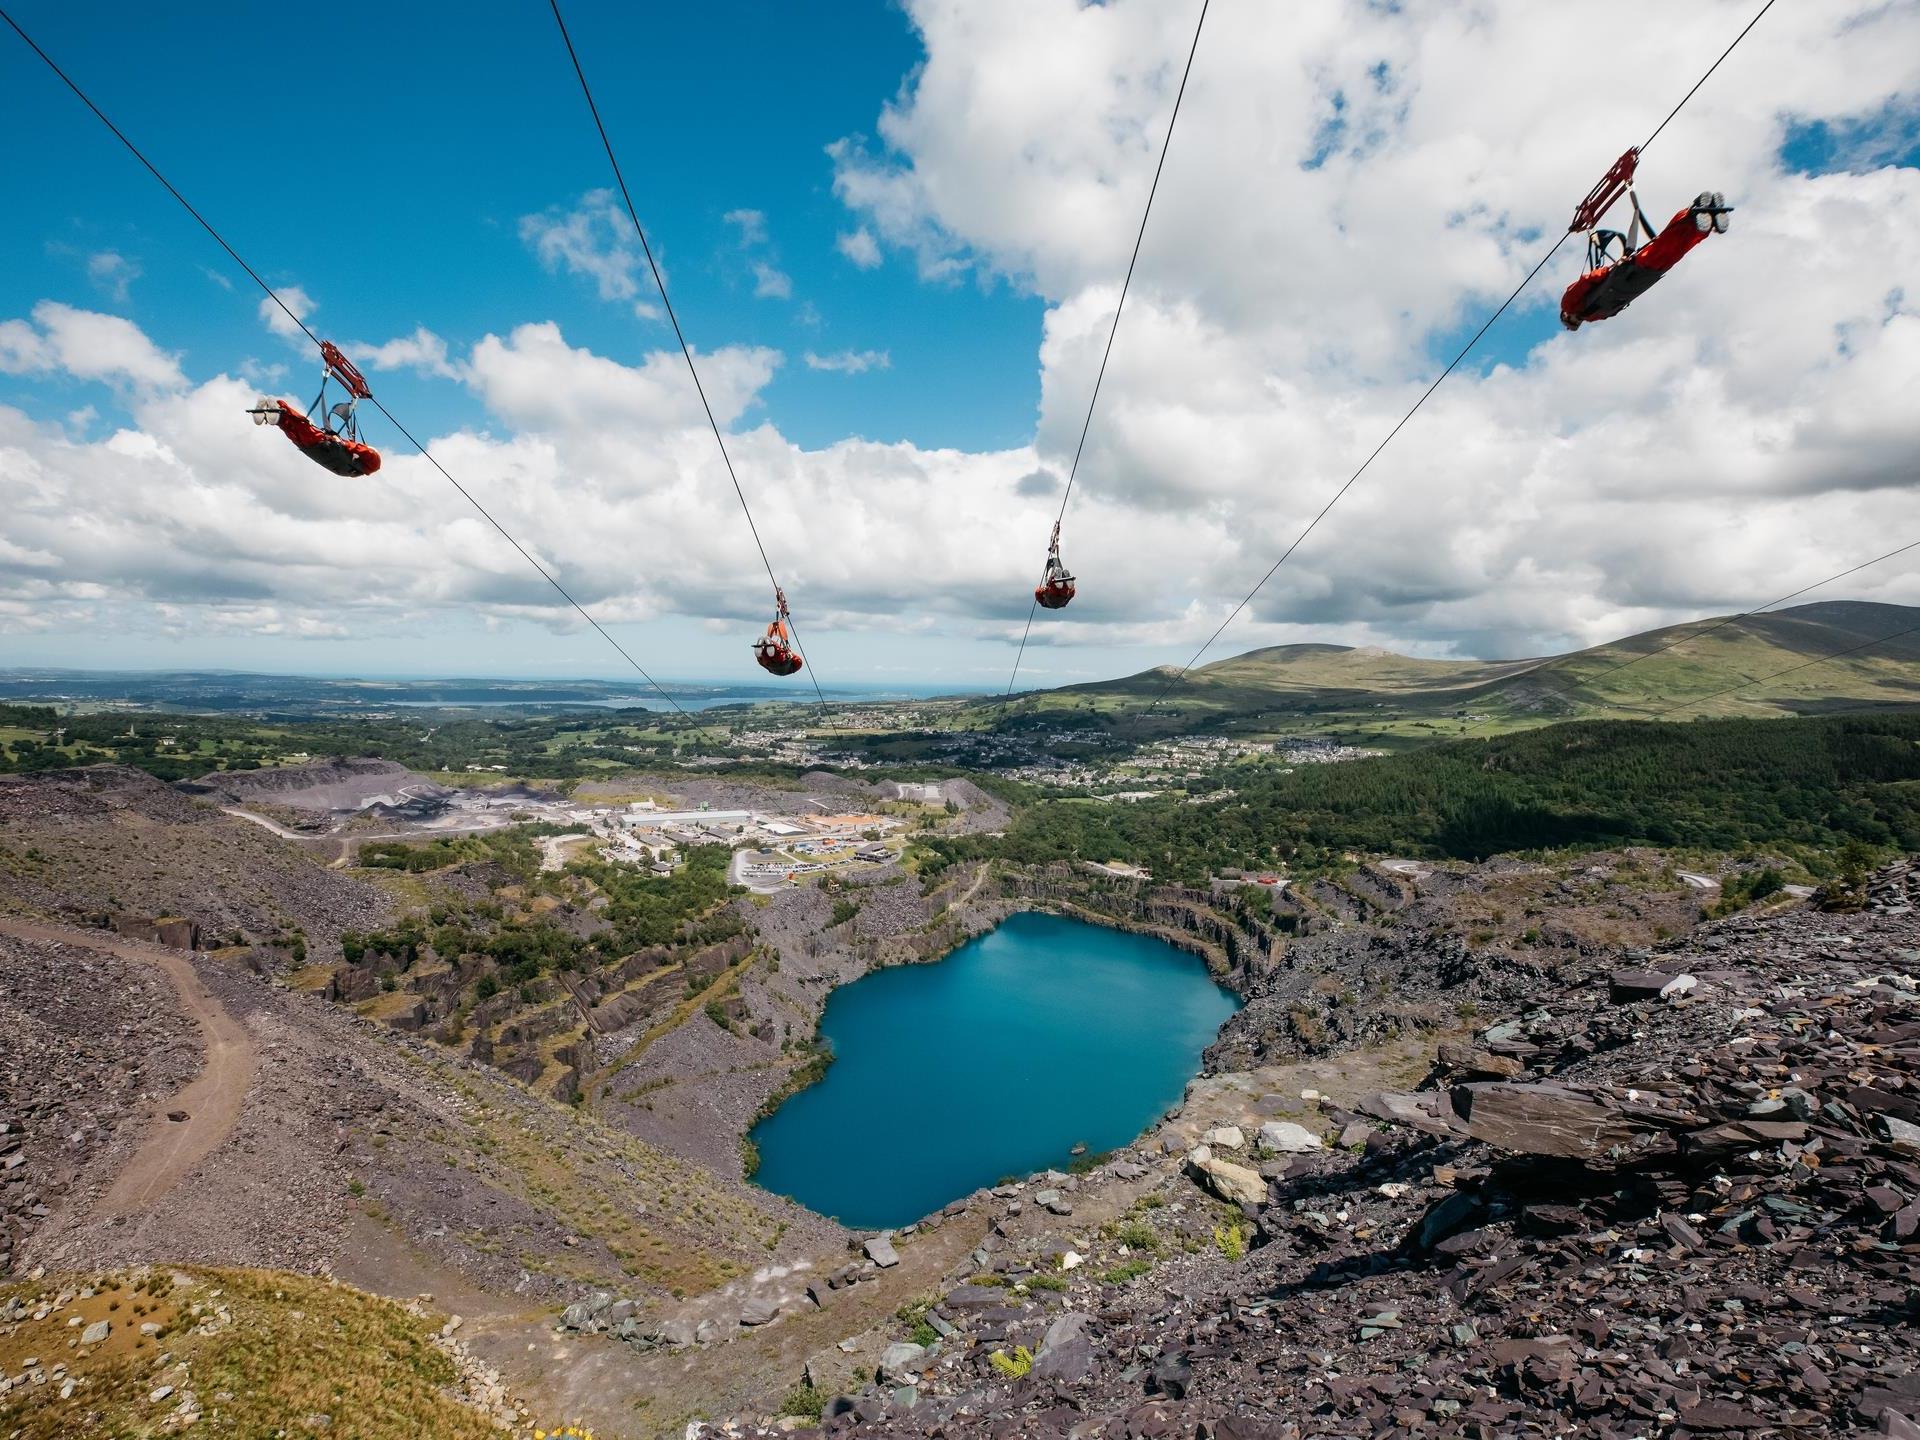 Penrhyn Quarry, home to Velocity 2